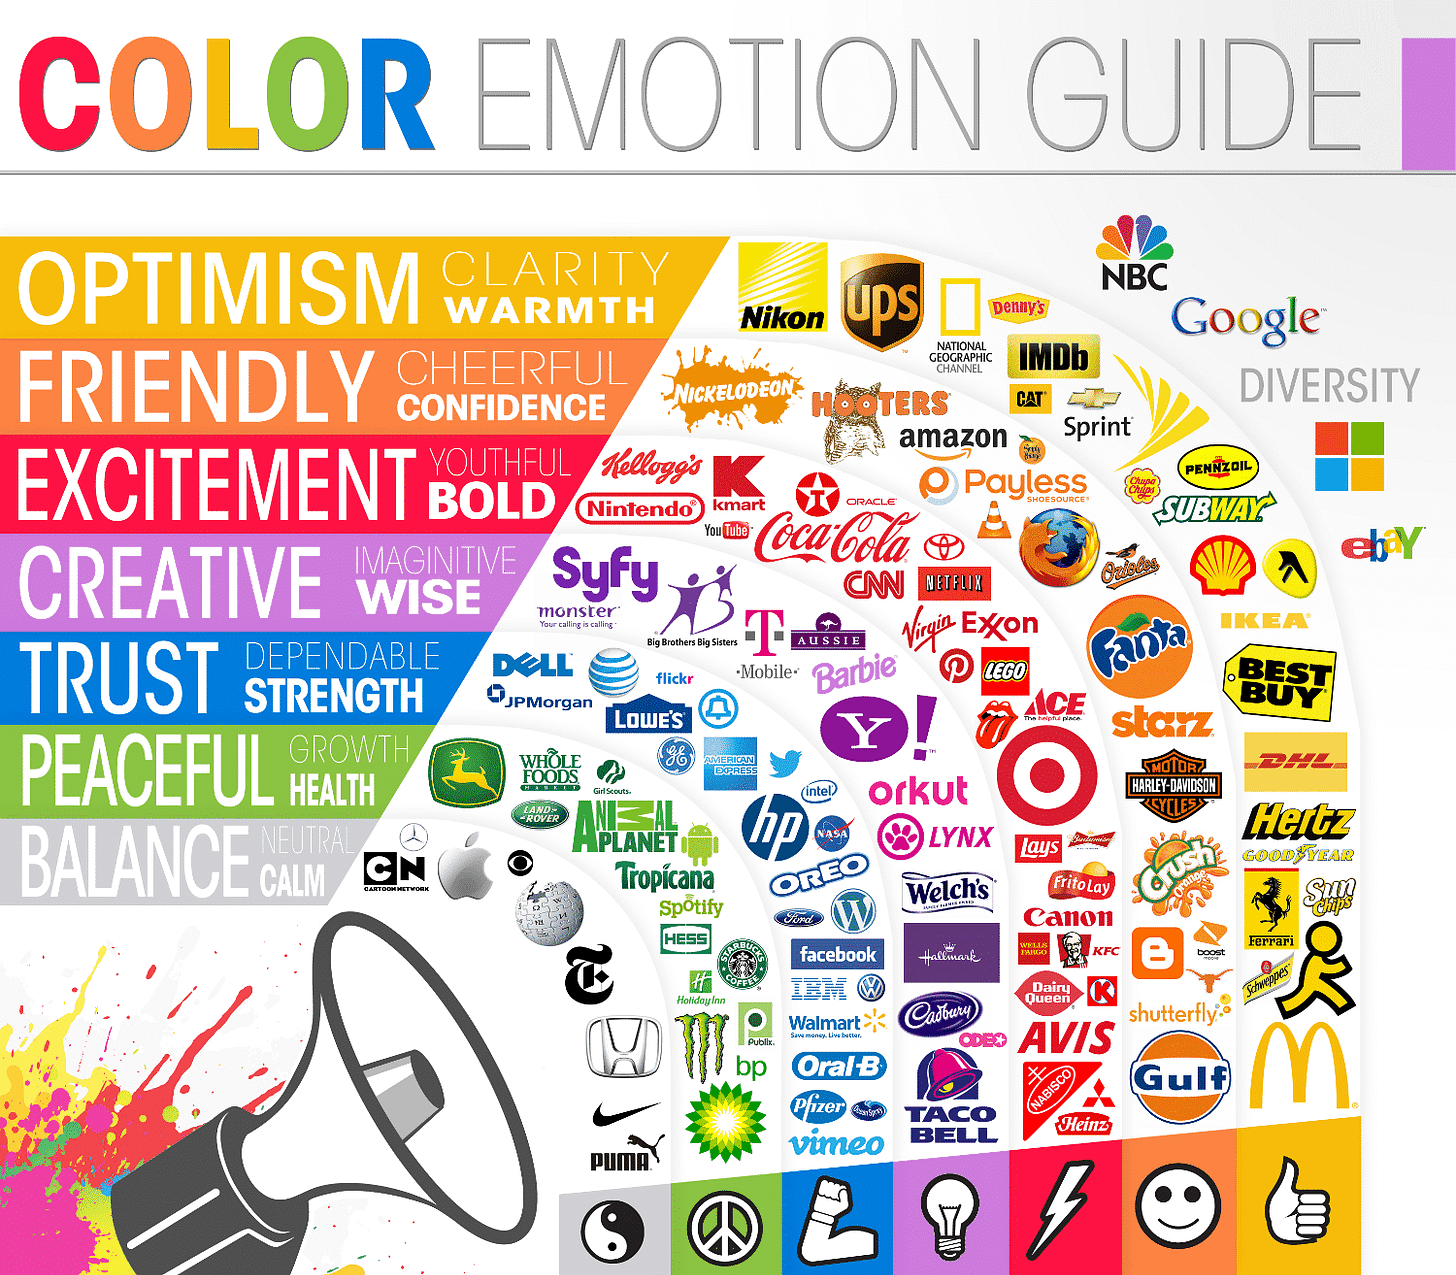 Color emotion guide. The psychology of color is presented in a cool and colorful infographic by The Logo Company